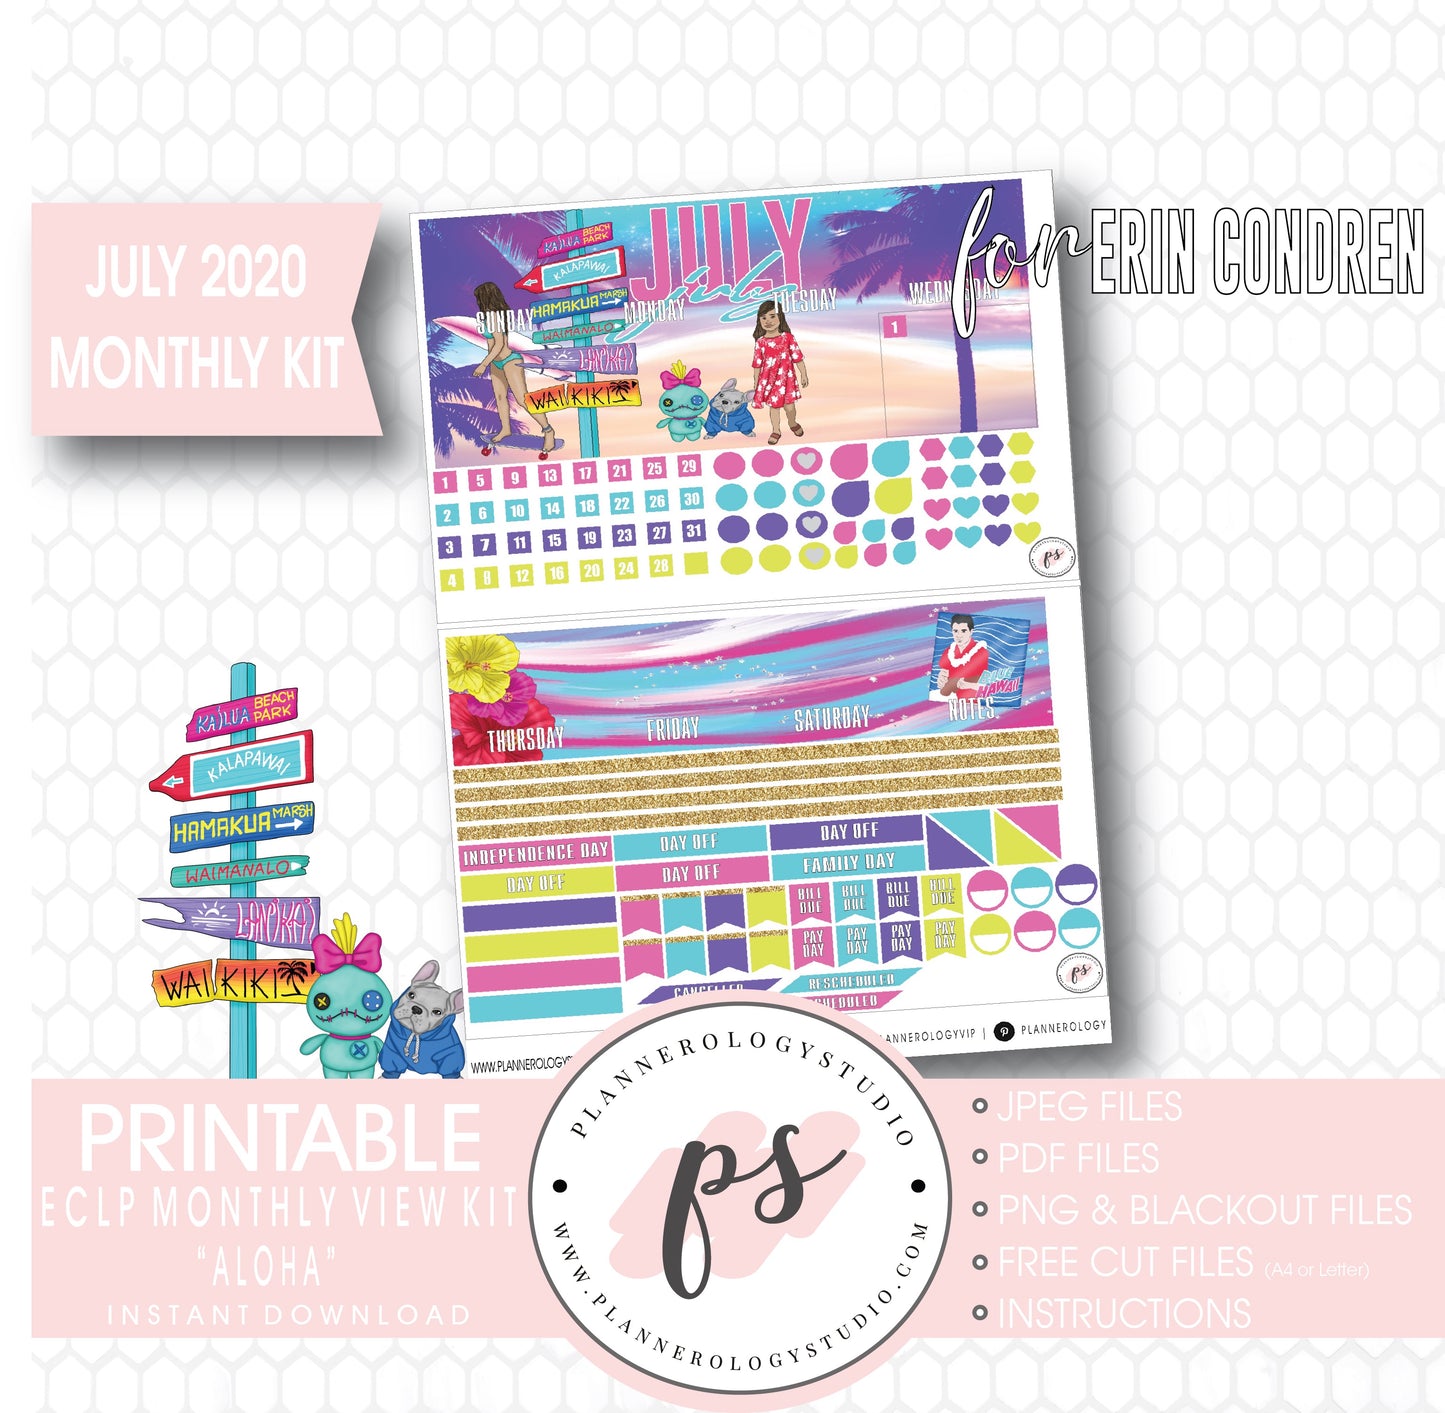 Aloha July 2020 Monthly View Kit Digital Printable Planner Stickers (for use with Erin Condren) - Plannerologystudio